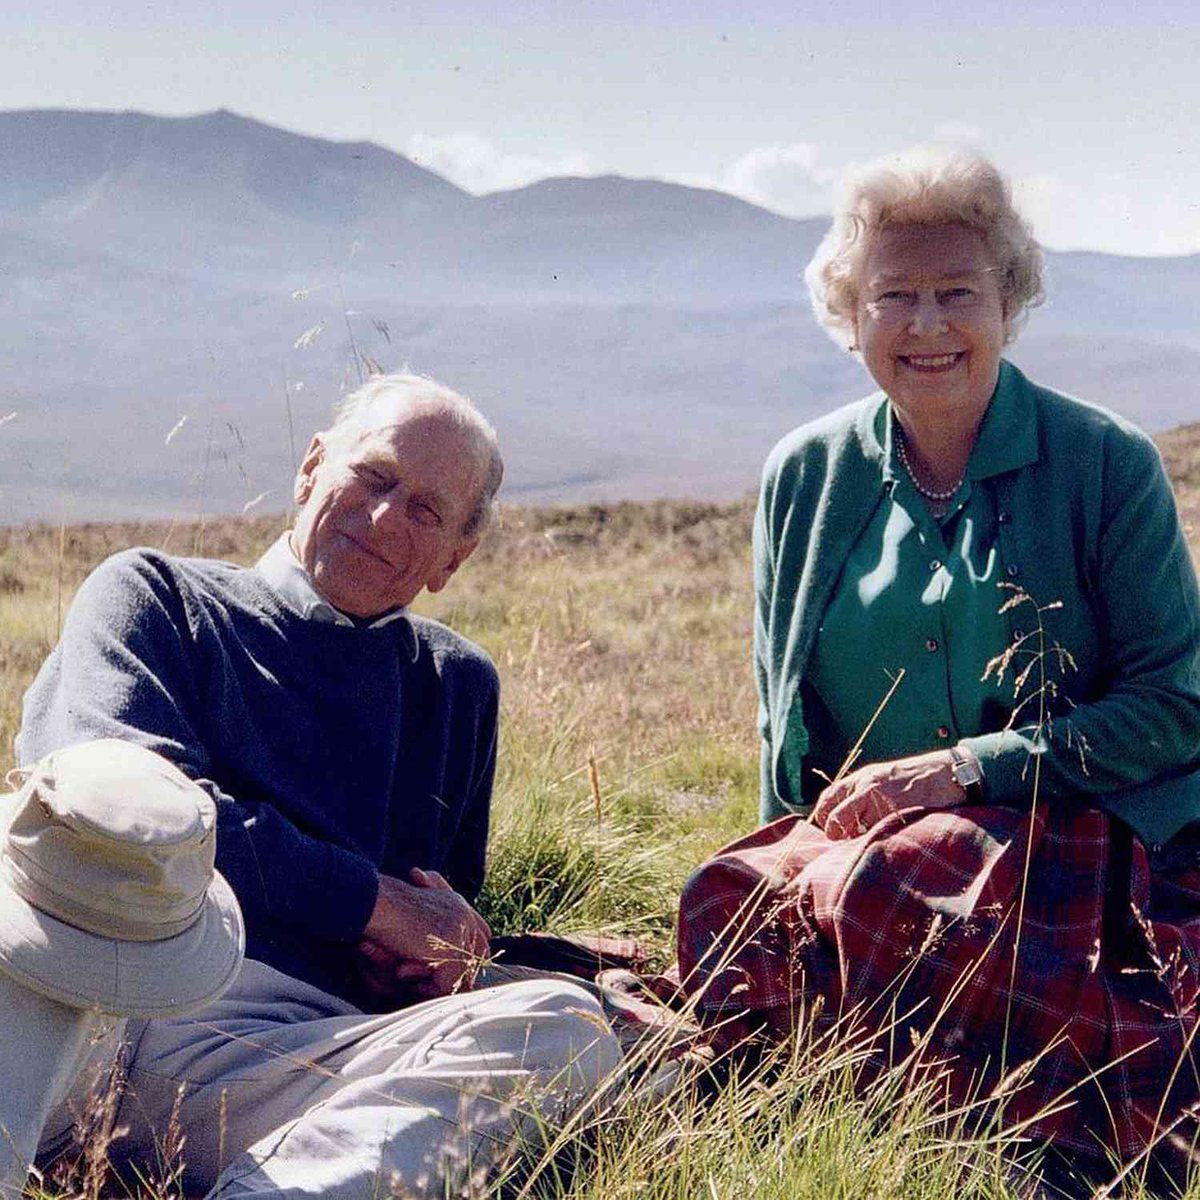 “He has, quite simply, been my strength and stay all these years, and I, and his whole family, and this and many other countries, owe him a debt greater than he would ever claim, or we shall ever know.” #QueenElizabethII speech November 1997. #PrincePhilip